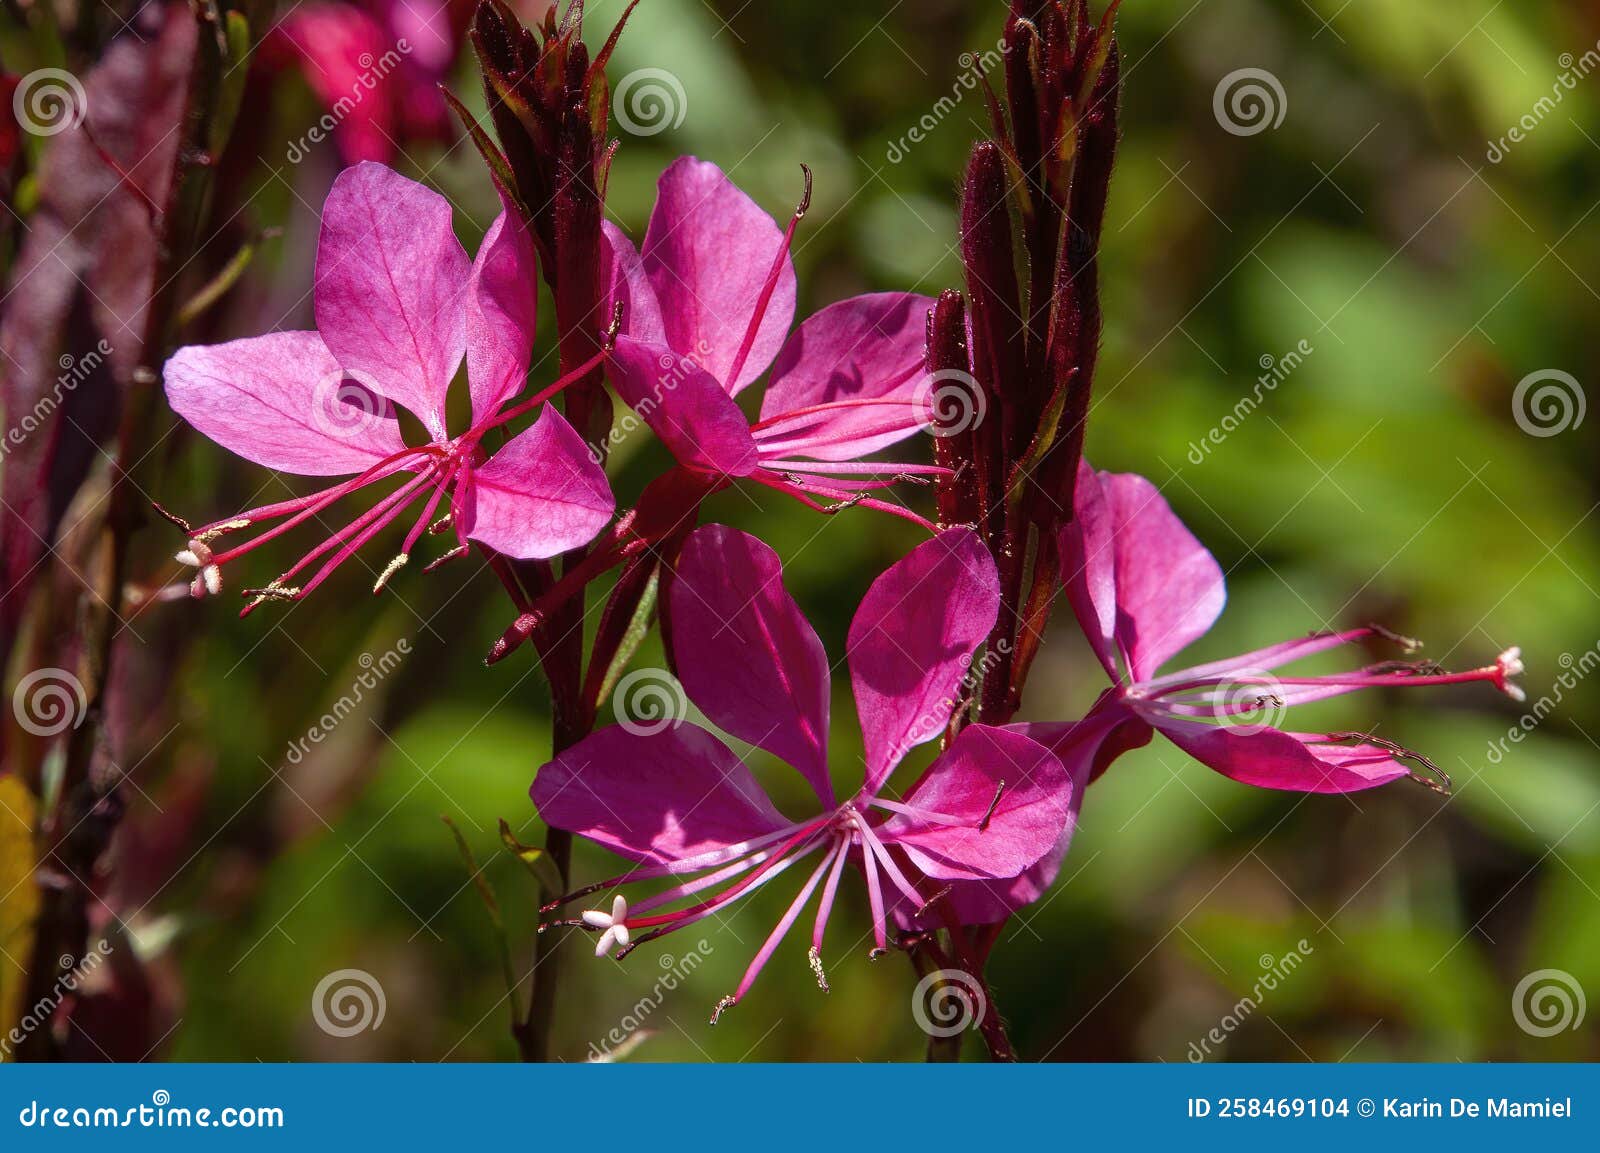 bright pink flowers of a oenothera lindheimeri or lindheimer`s beeblossom plant